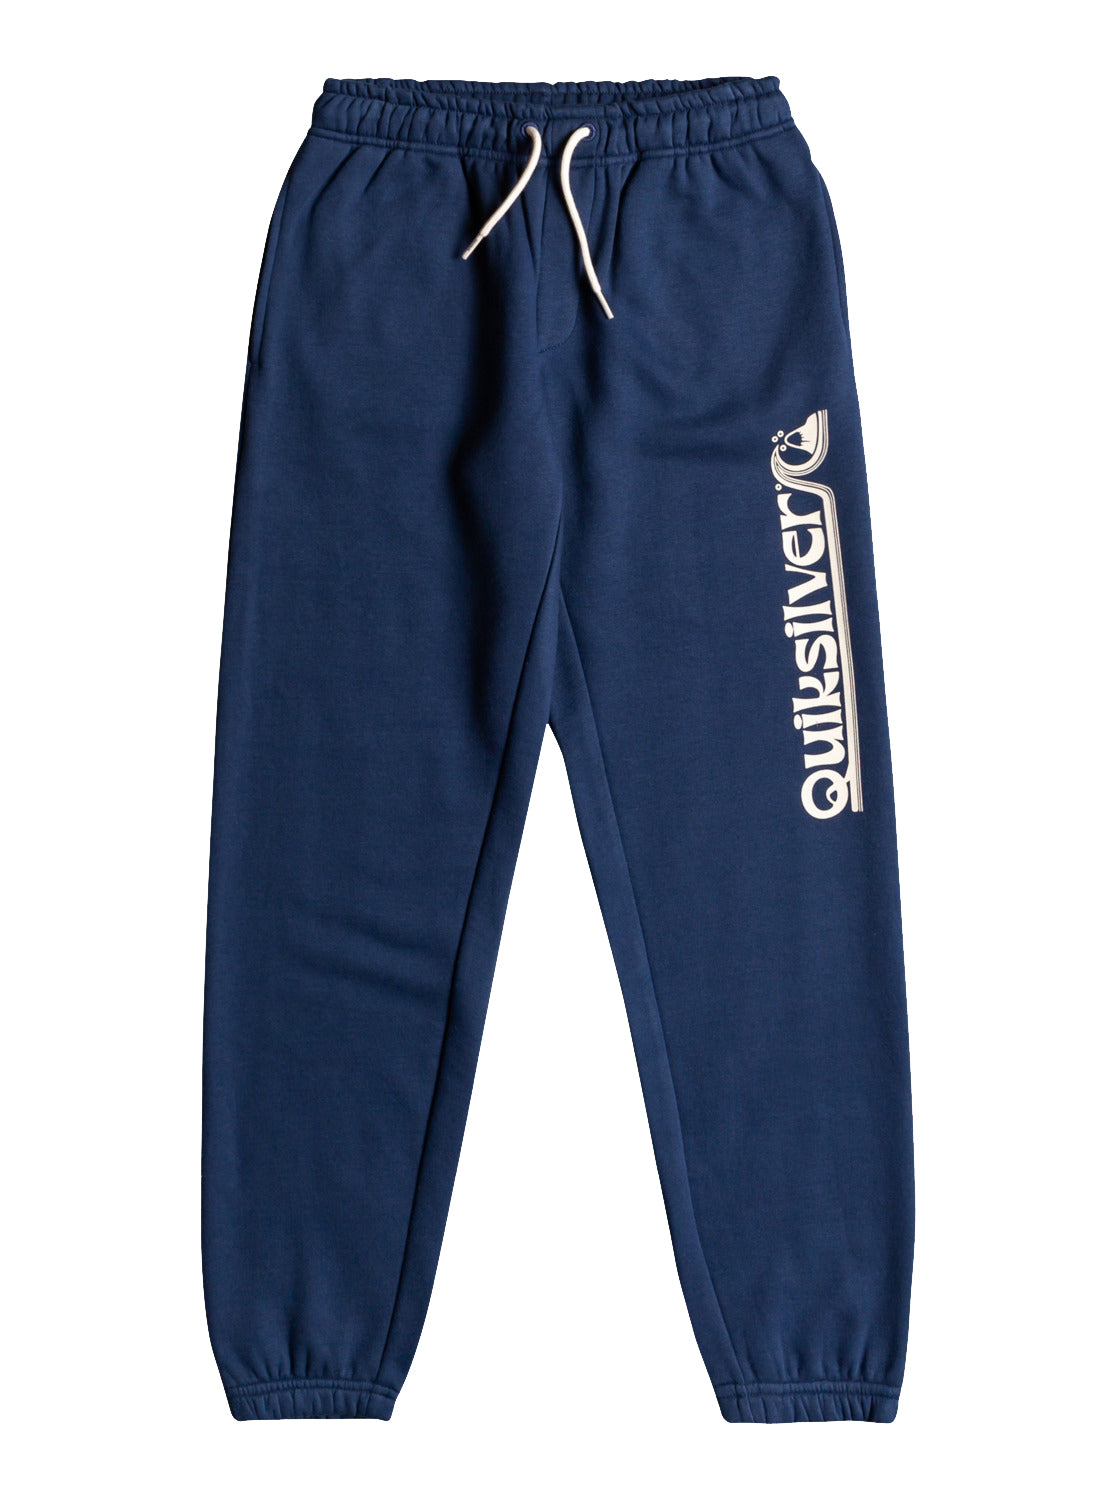 Quiksilver Trackpant Screen Youth Pants BSN0 XL/16